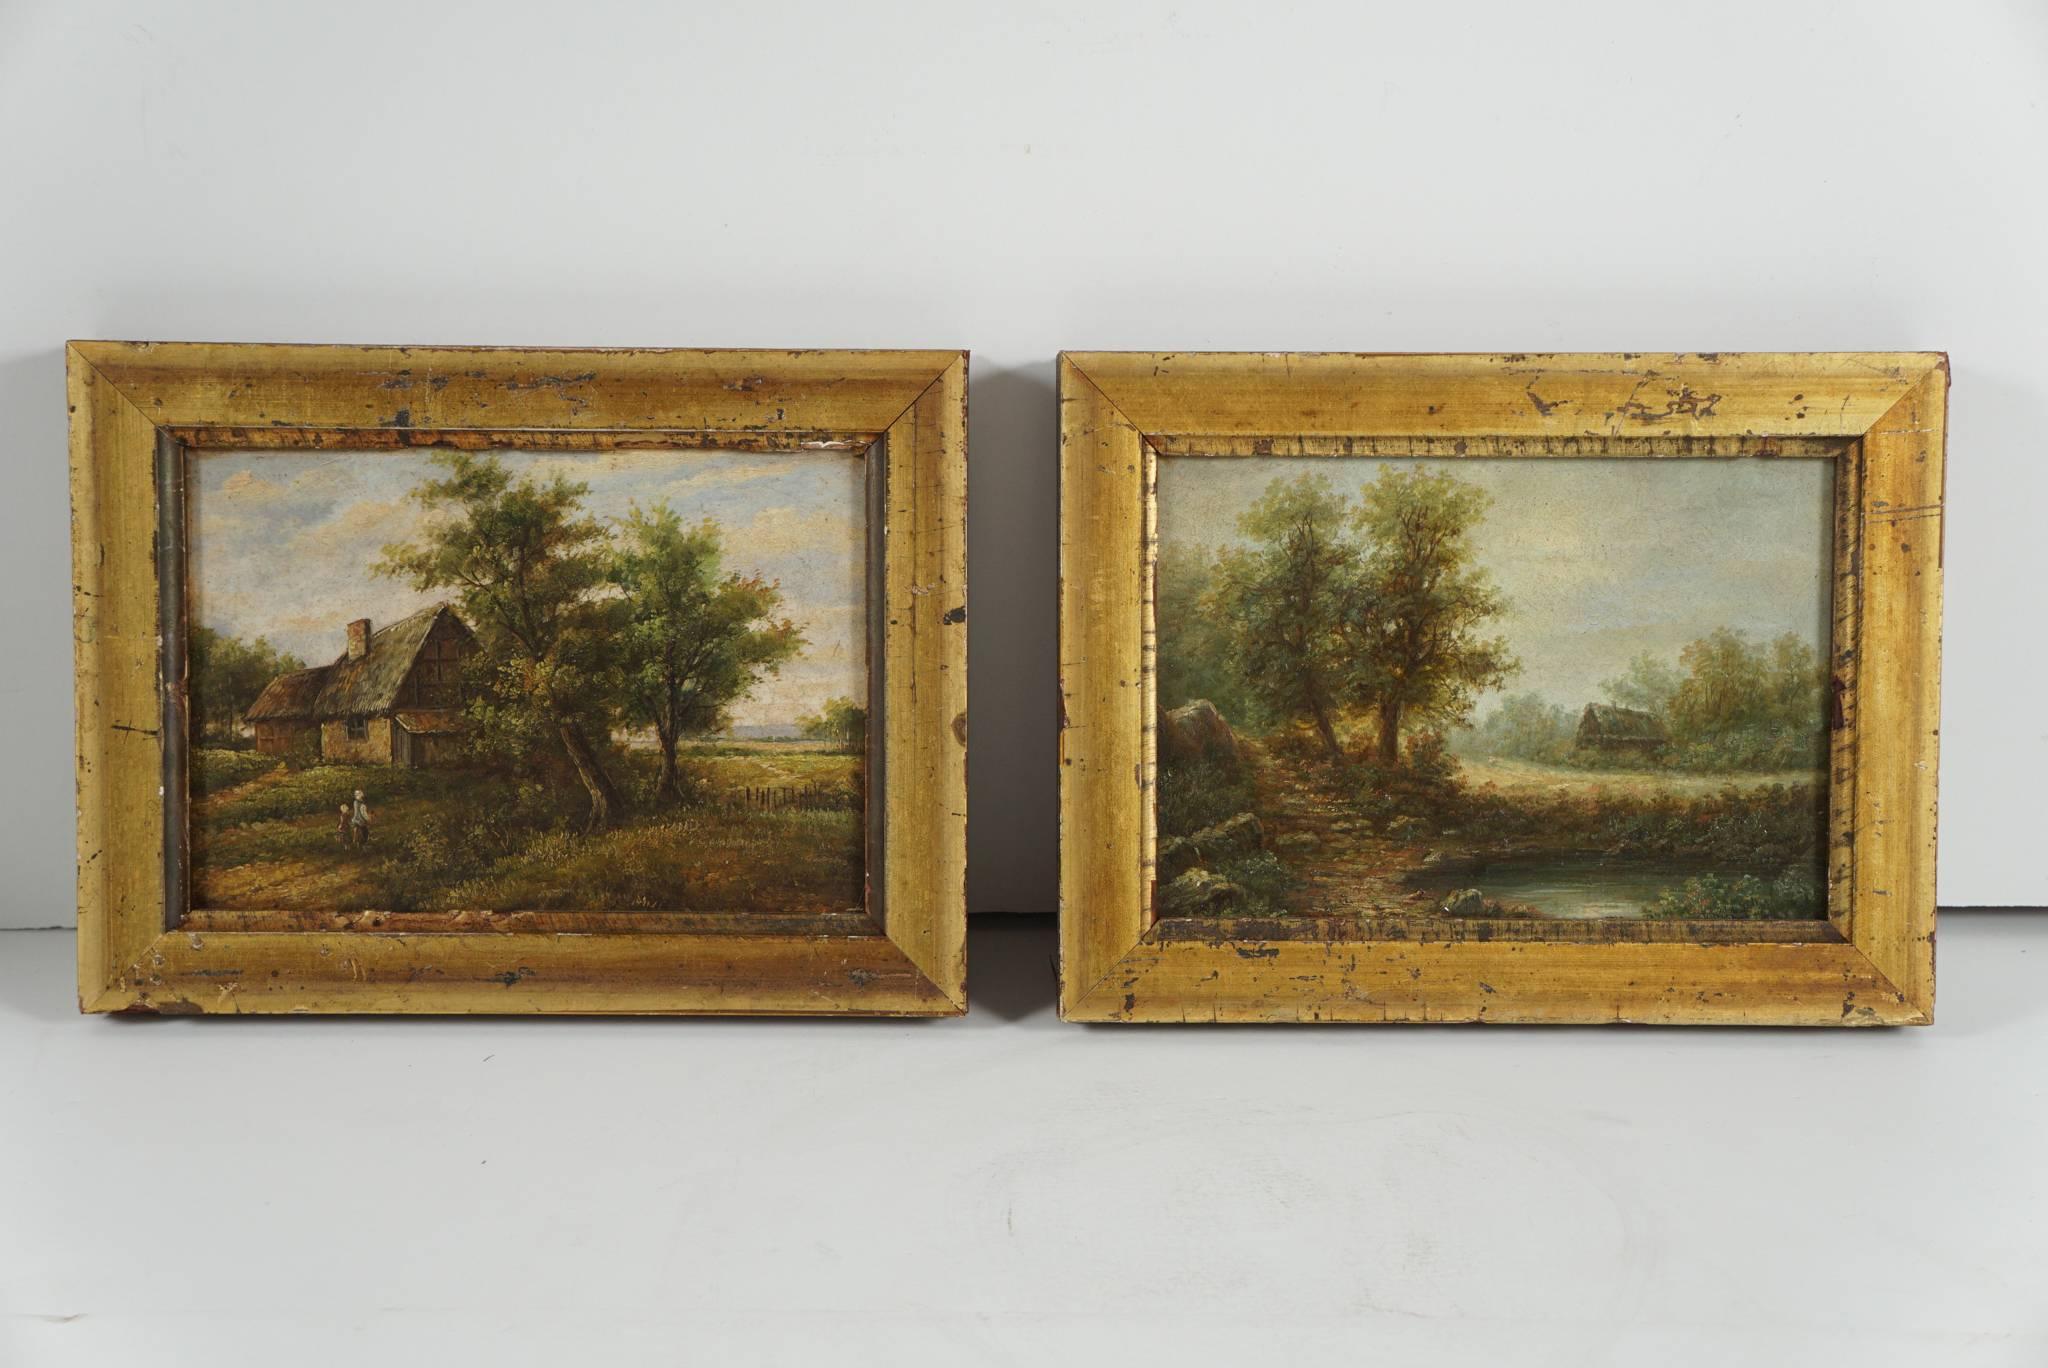 These bucolic scenes of rural living and farm life probably come from German or Austrian painters and are most likely meant to be a pair, circa 1850-1860. The works are very detailed but painted using the qualities of the brush, not the formalized